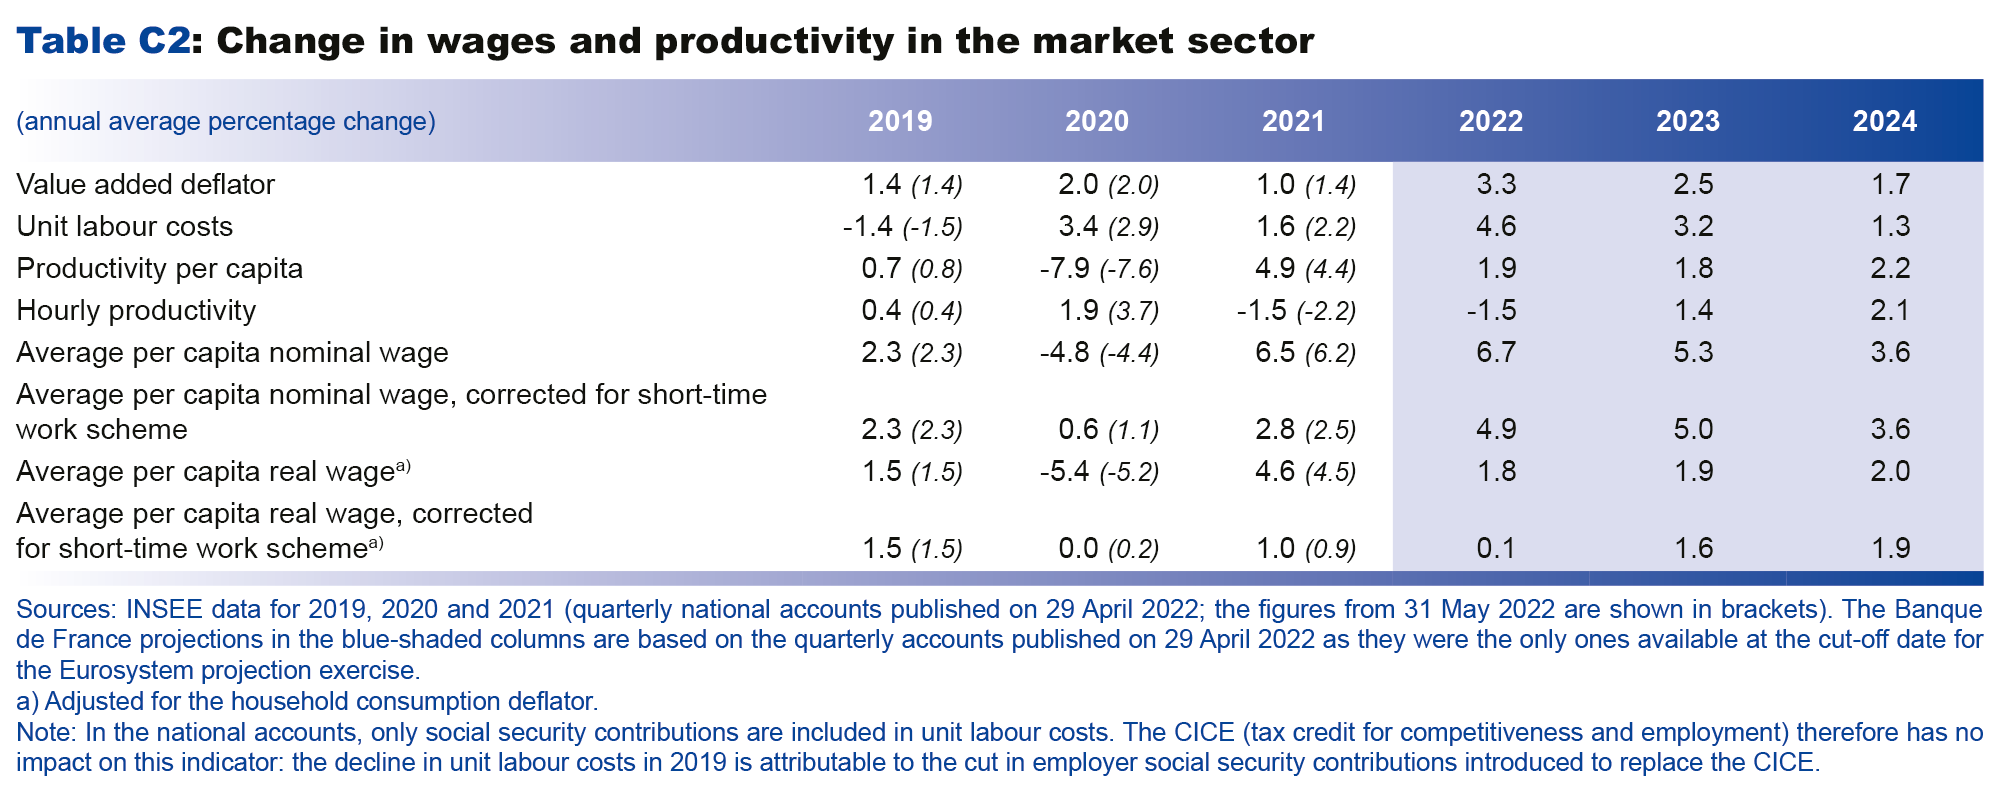 Macroeconomic projections – June 2022 - Change in wages and productivity in the market sector